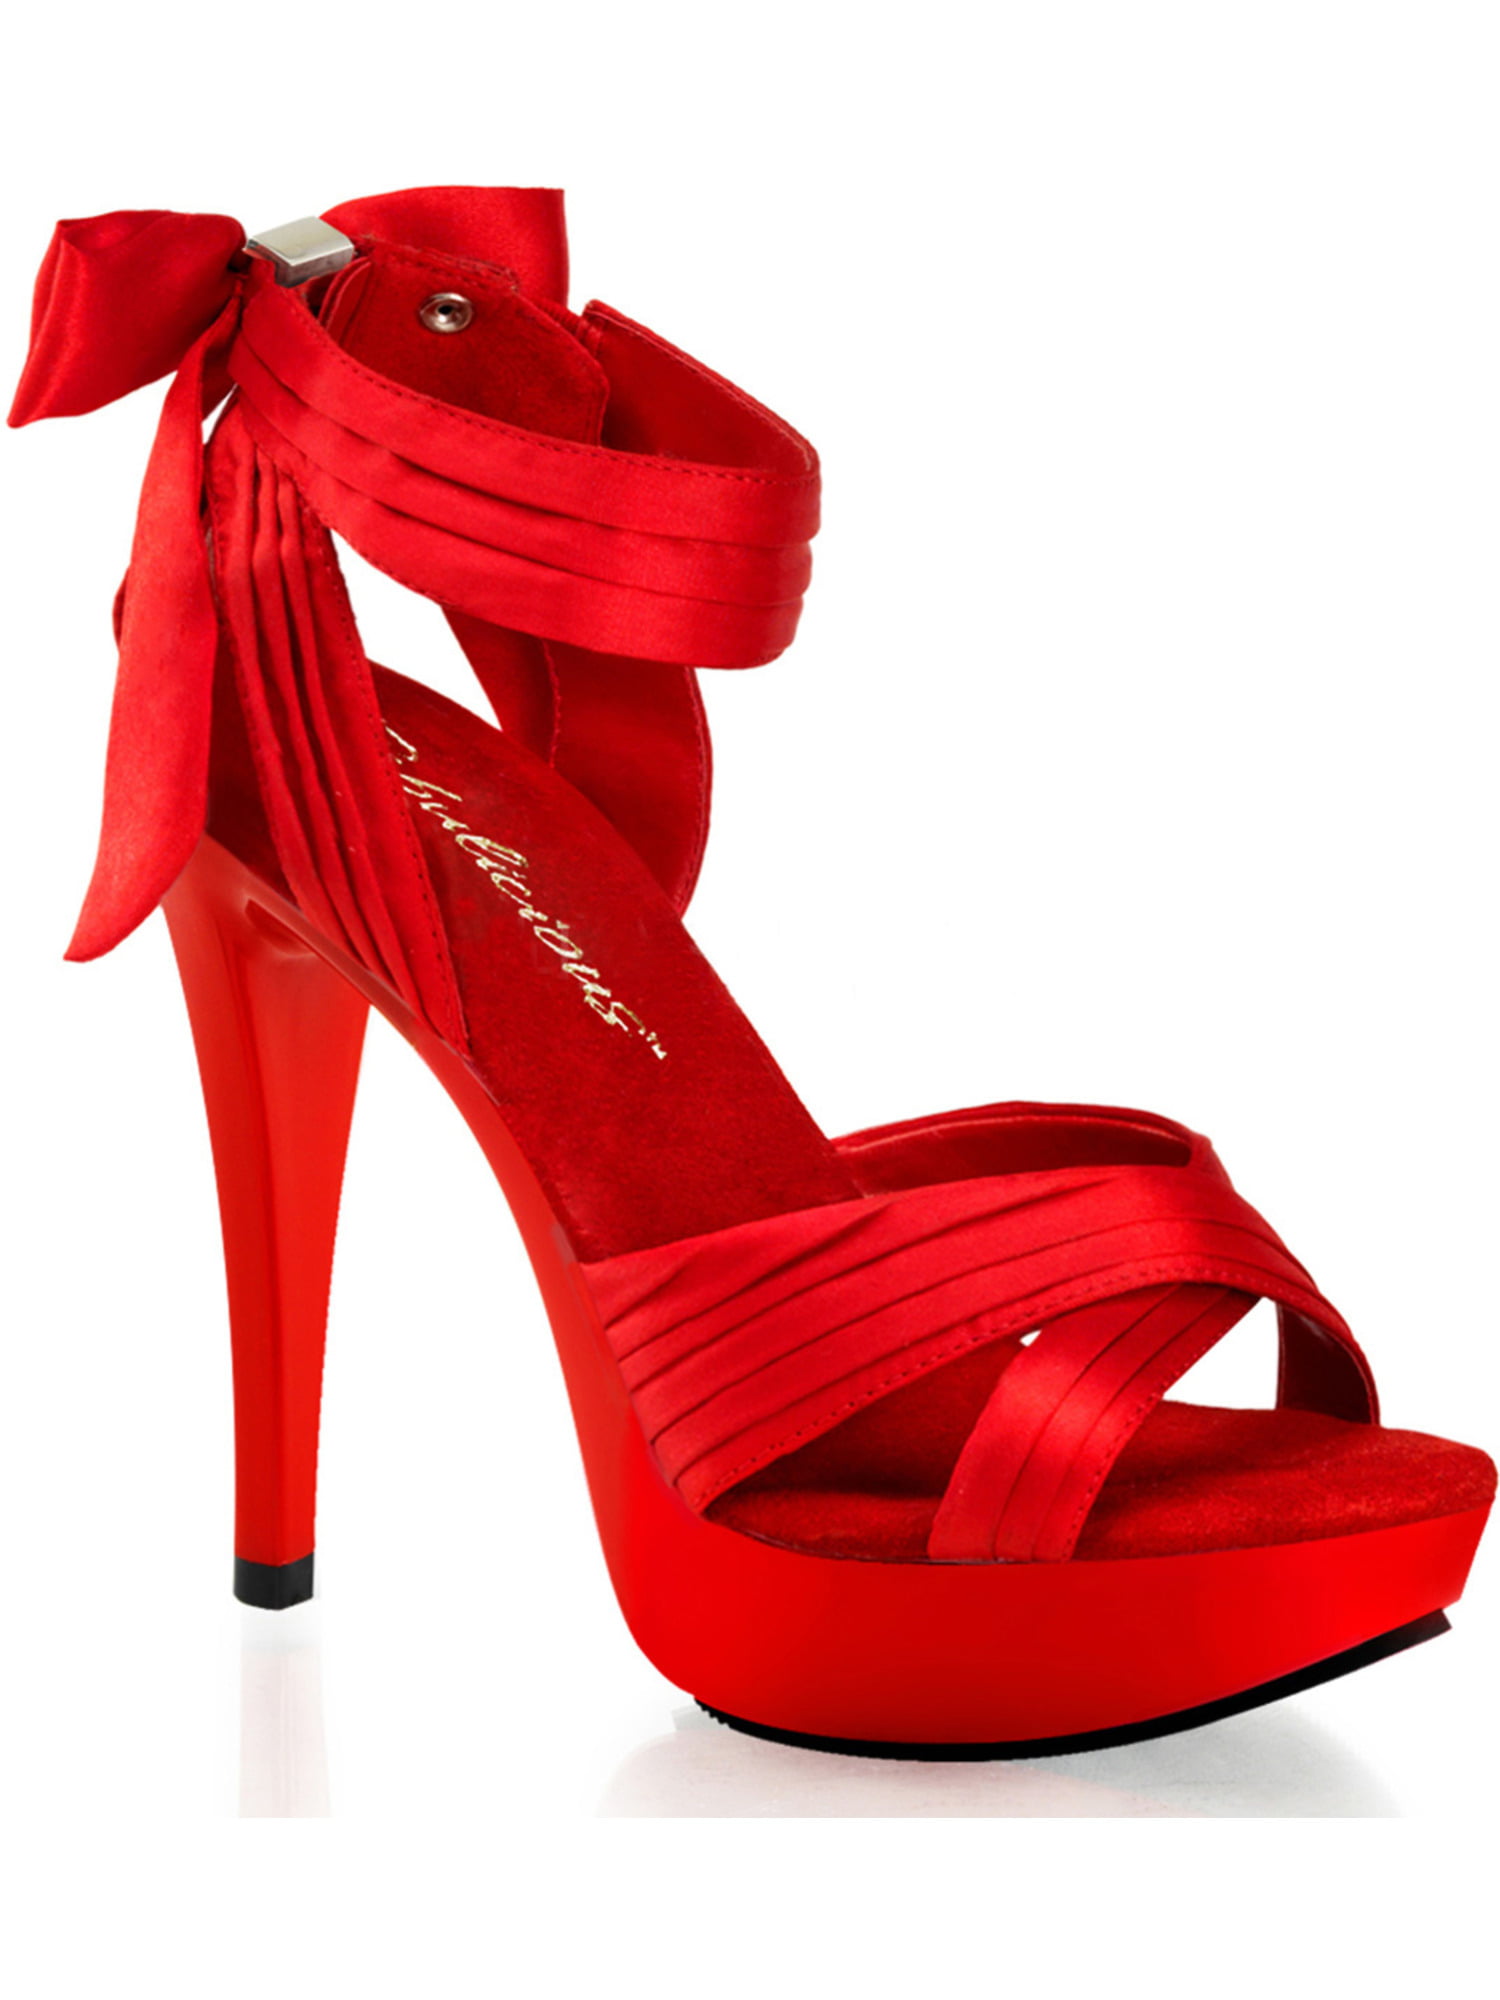 red satin dress shoes